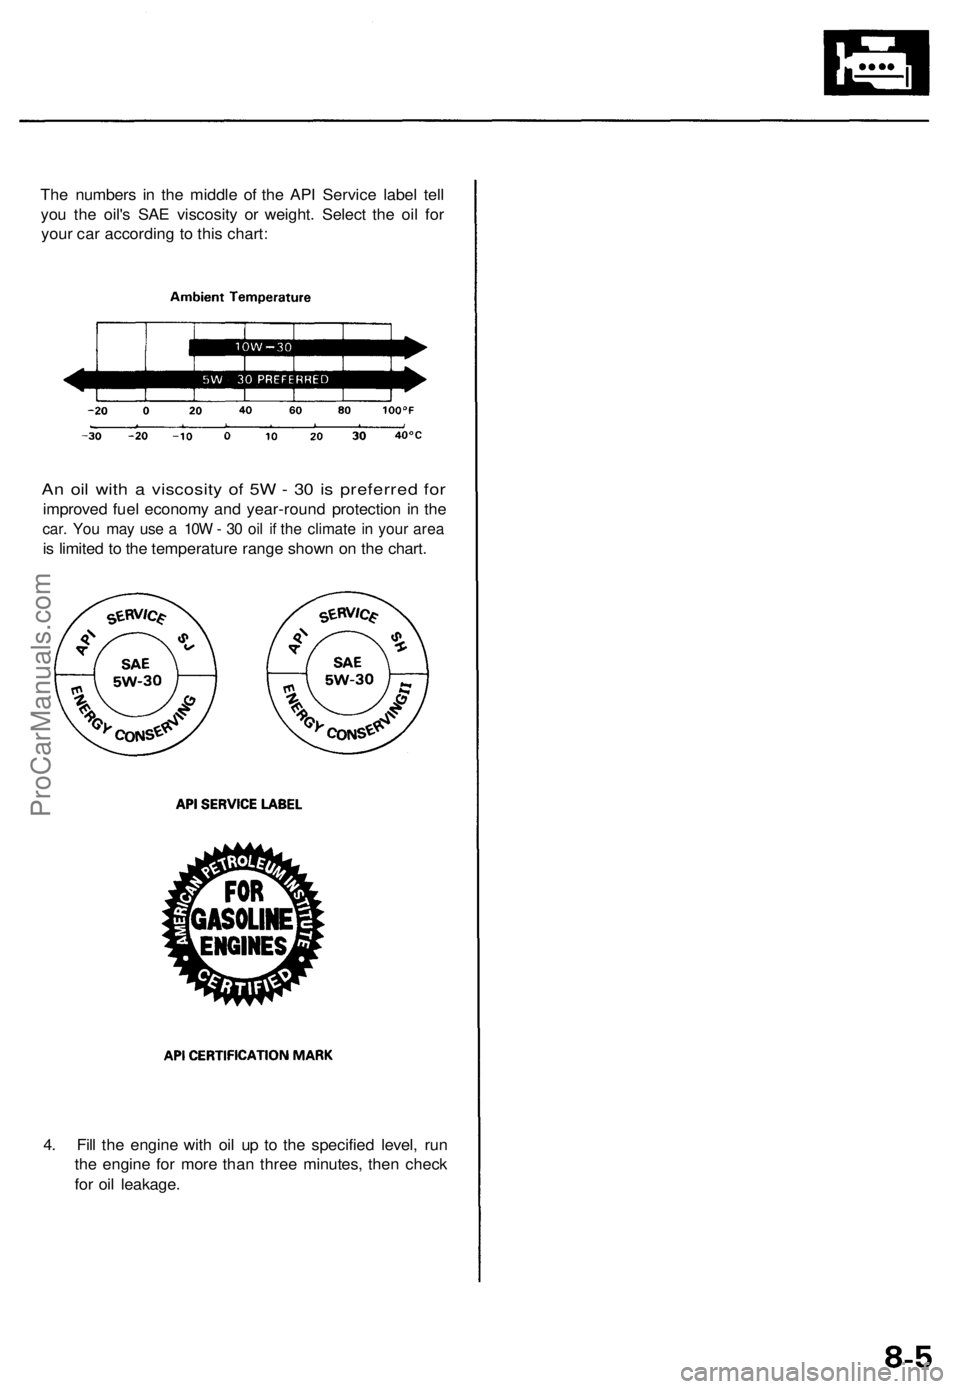 ACURA TL 1995  Service Repair Manual 
The numbers in the middle of the API Service label tell

you the oil's SAE viscosity or weight. Select the oil for

your car according to this chart:

An oil with a viscosity of 5W - 30 is prefer